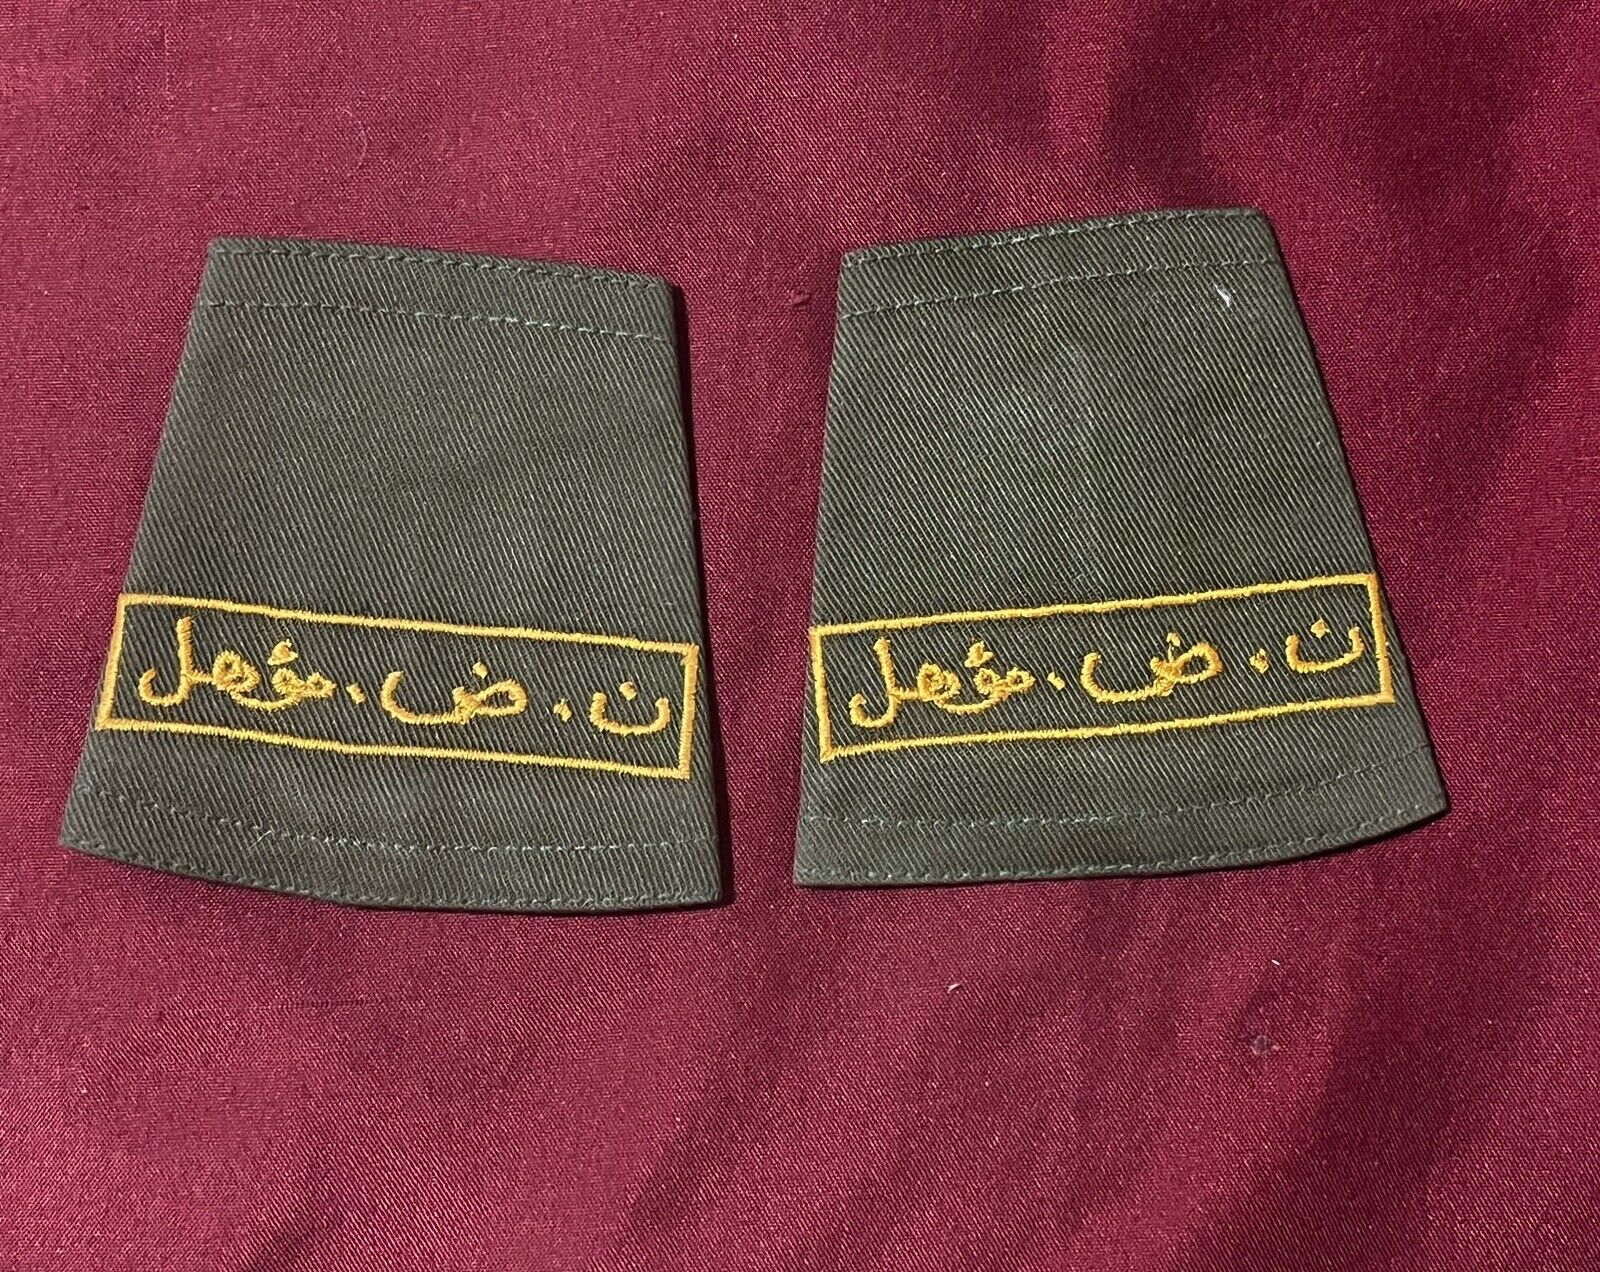 Iraq- Vintage Iraqi Qualified deputy officer Shoulder Ranks, From 1980’s Rare.